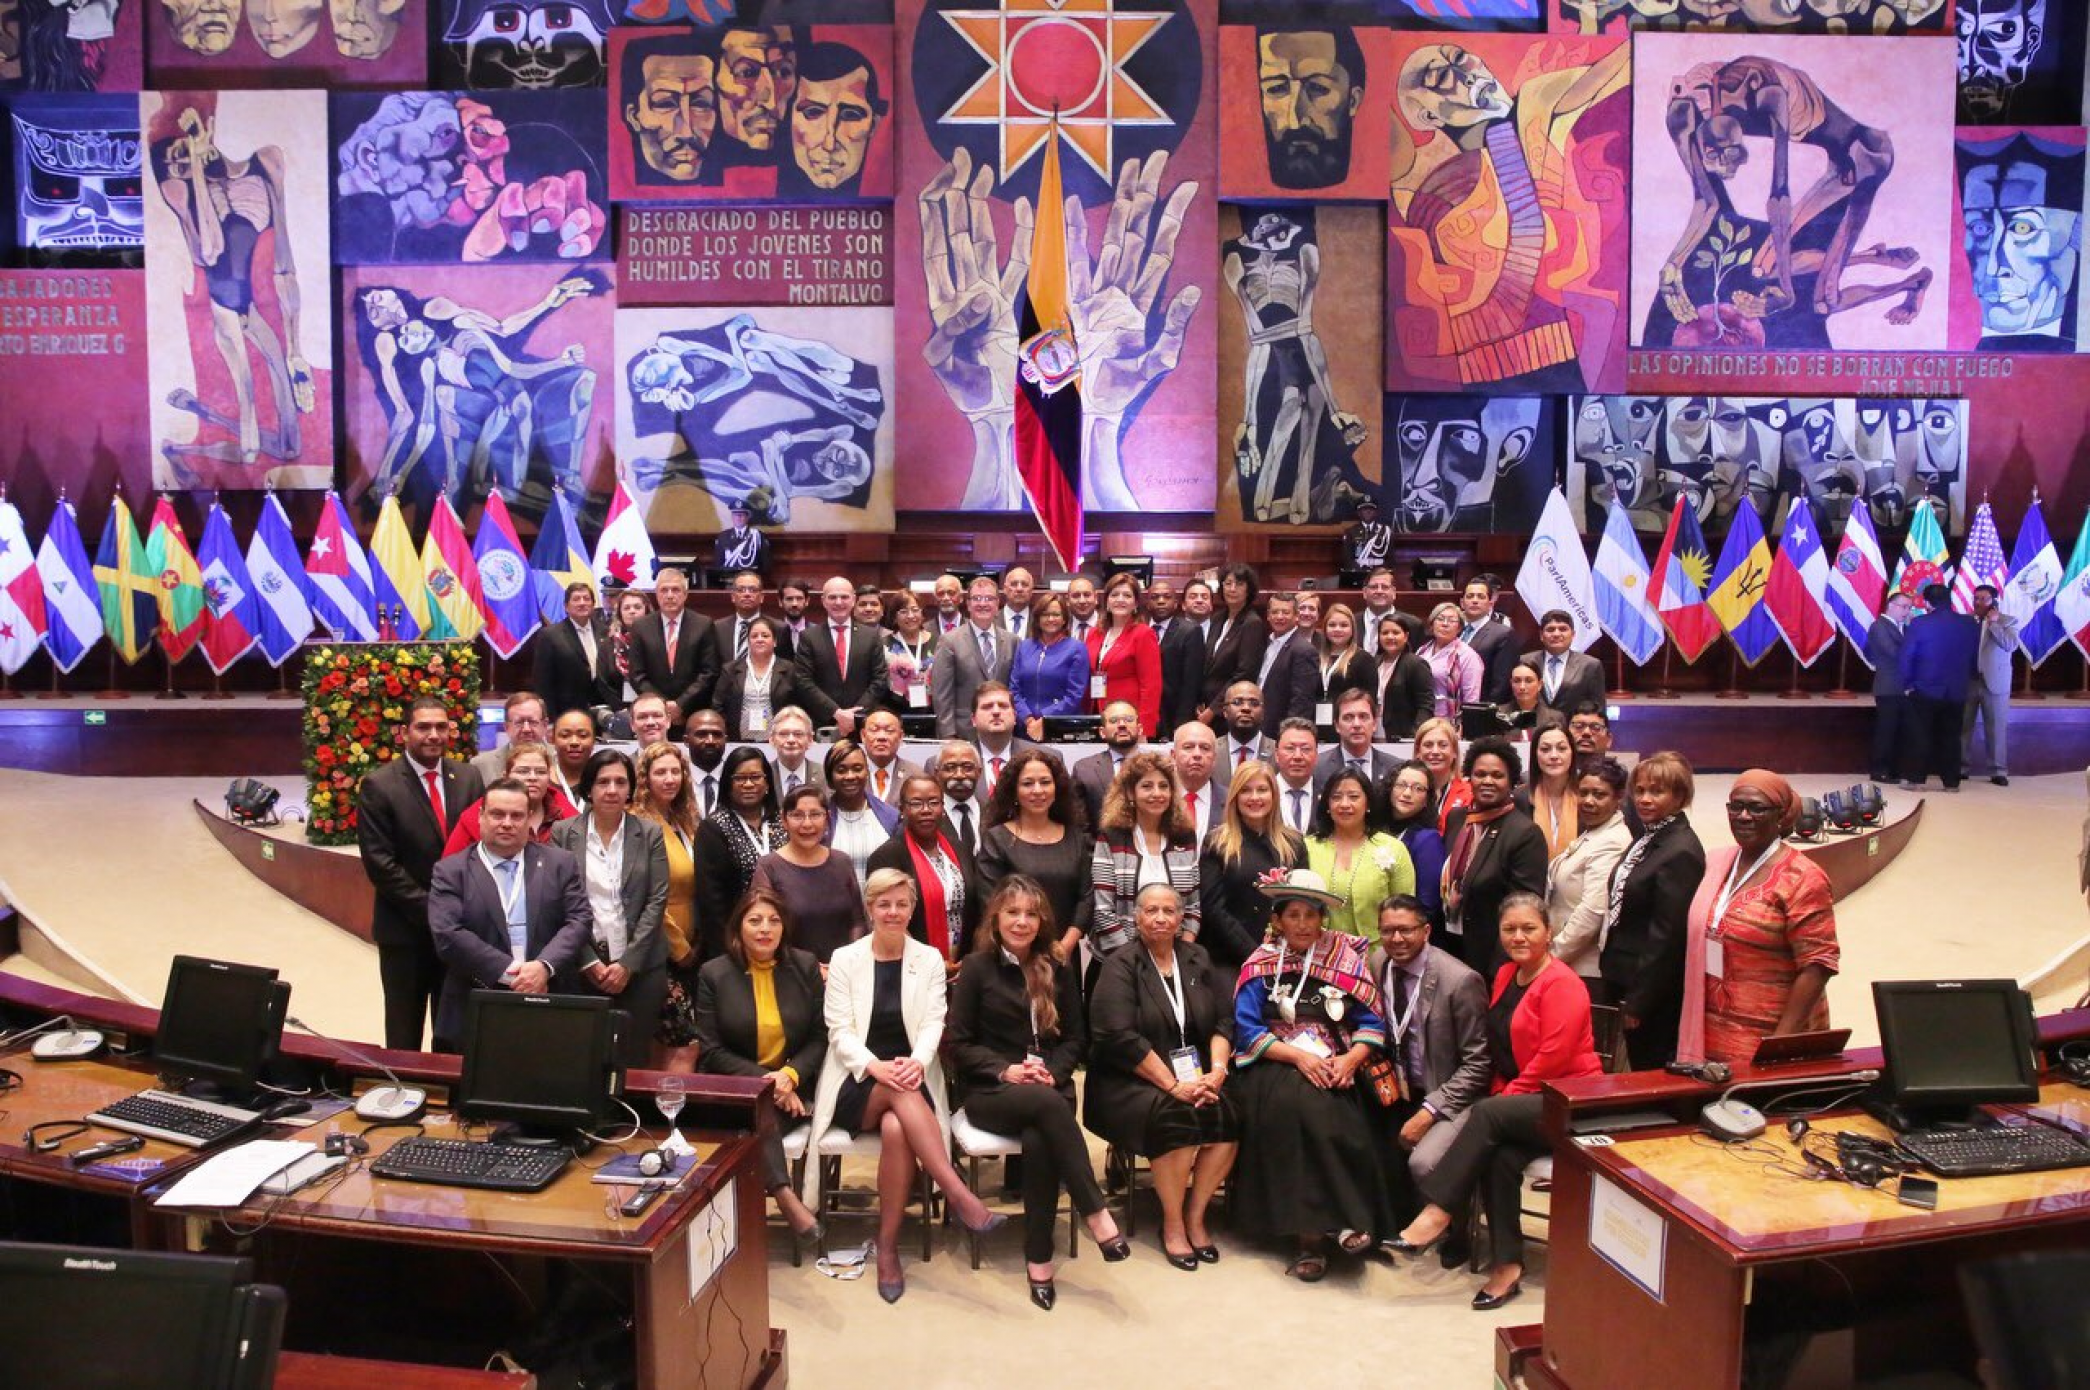 Ecuadorian legislators alongside legislators from more than 27 countries across Latin America and the Caribbean in the plenary hall of the Ecuadorian National Assembly, following the opening session of the Fourth Gathering of the ParlAmericas Open Parliam